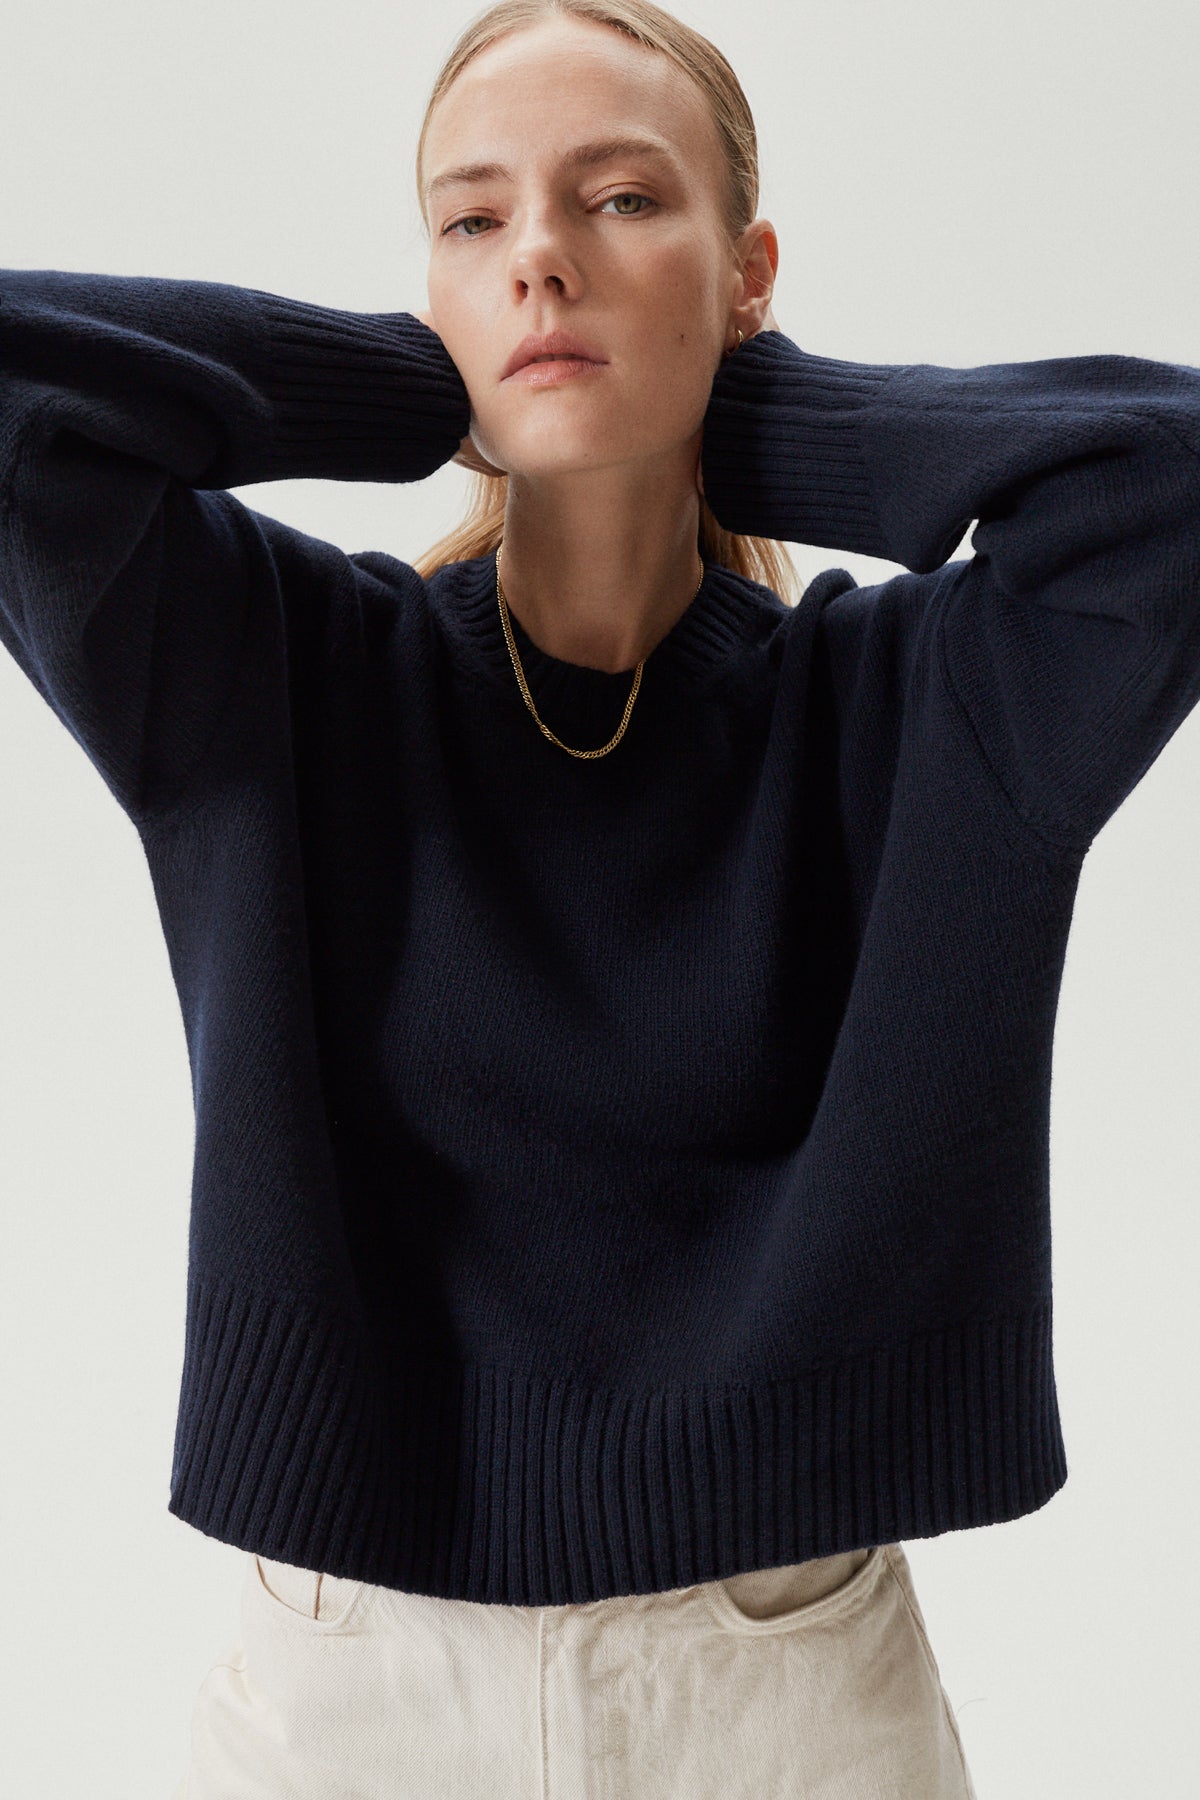 the woolen chunky sweater mtm blue navy